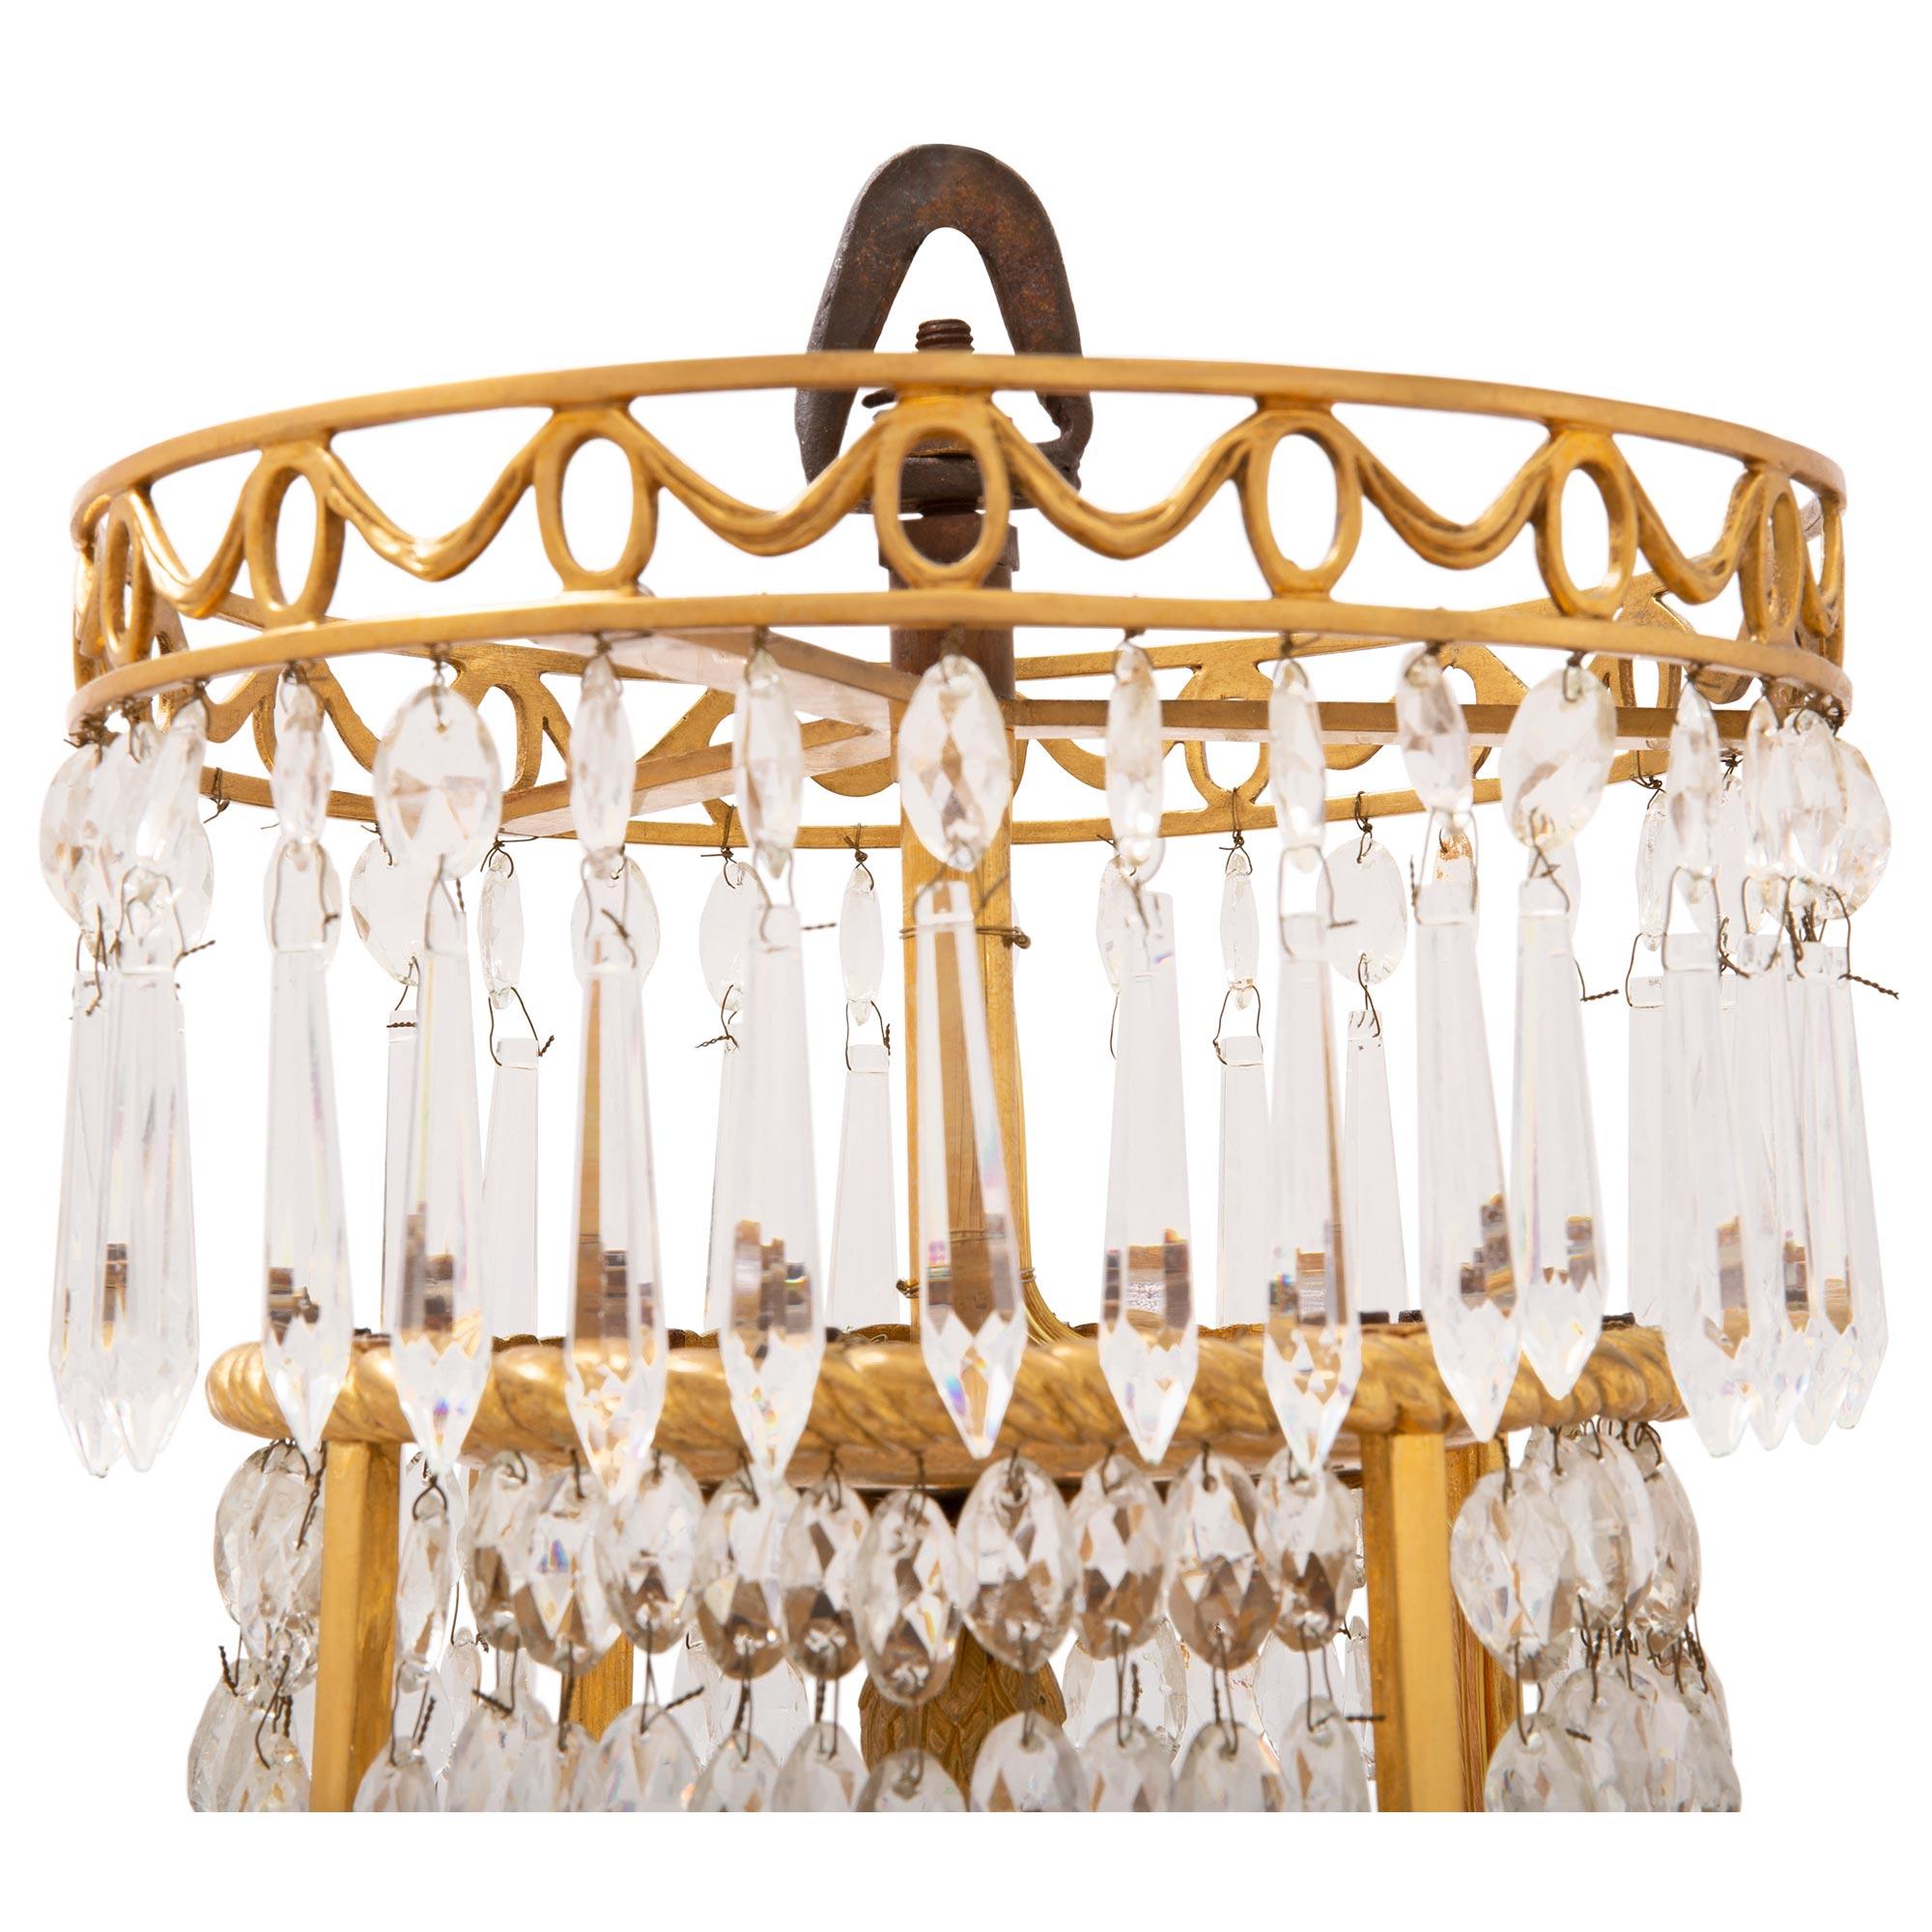 Baltic Pair of 19th Century Neoclassical Style Ormolu and Crystal Chandeliers For Sale